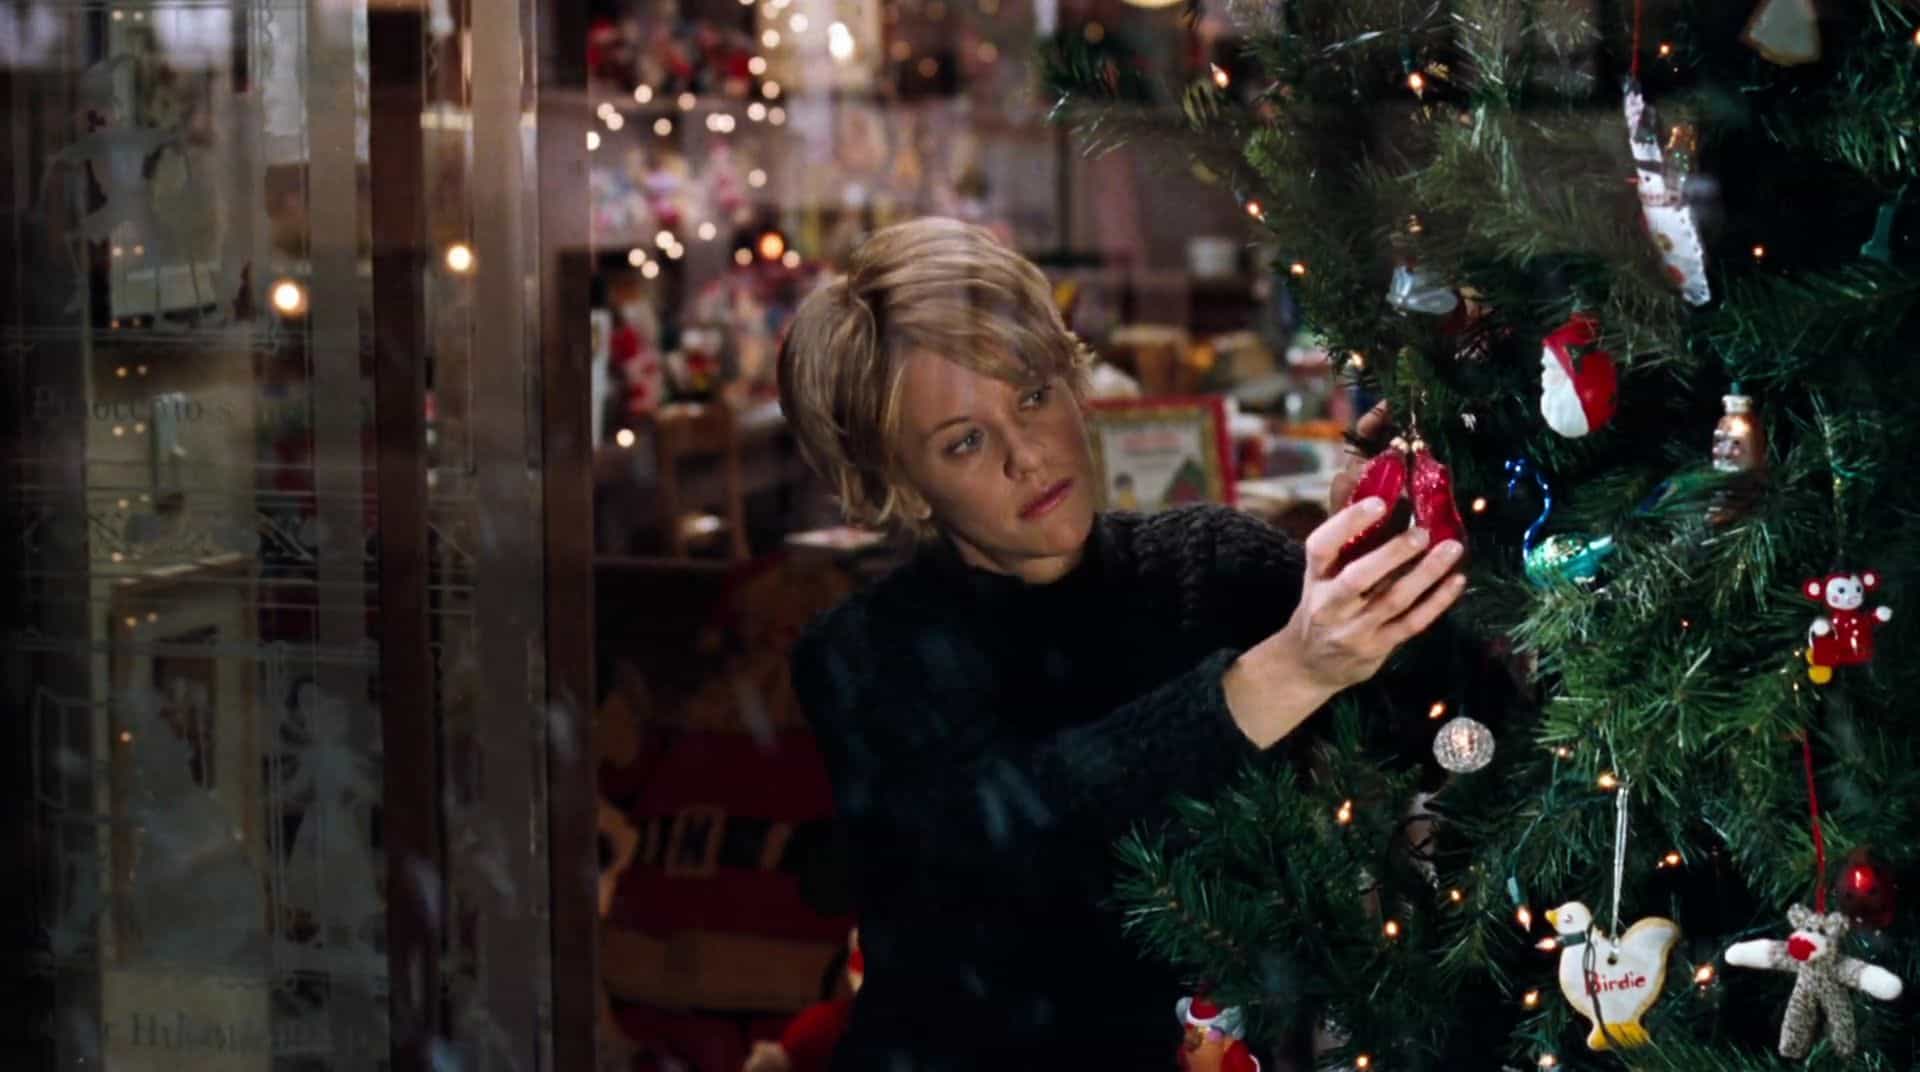 A woman decorates a Christmas tree in this image from Lauren Shuler Donner Productions.